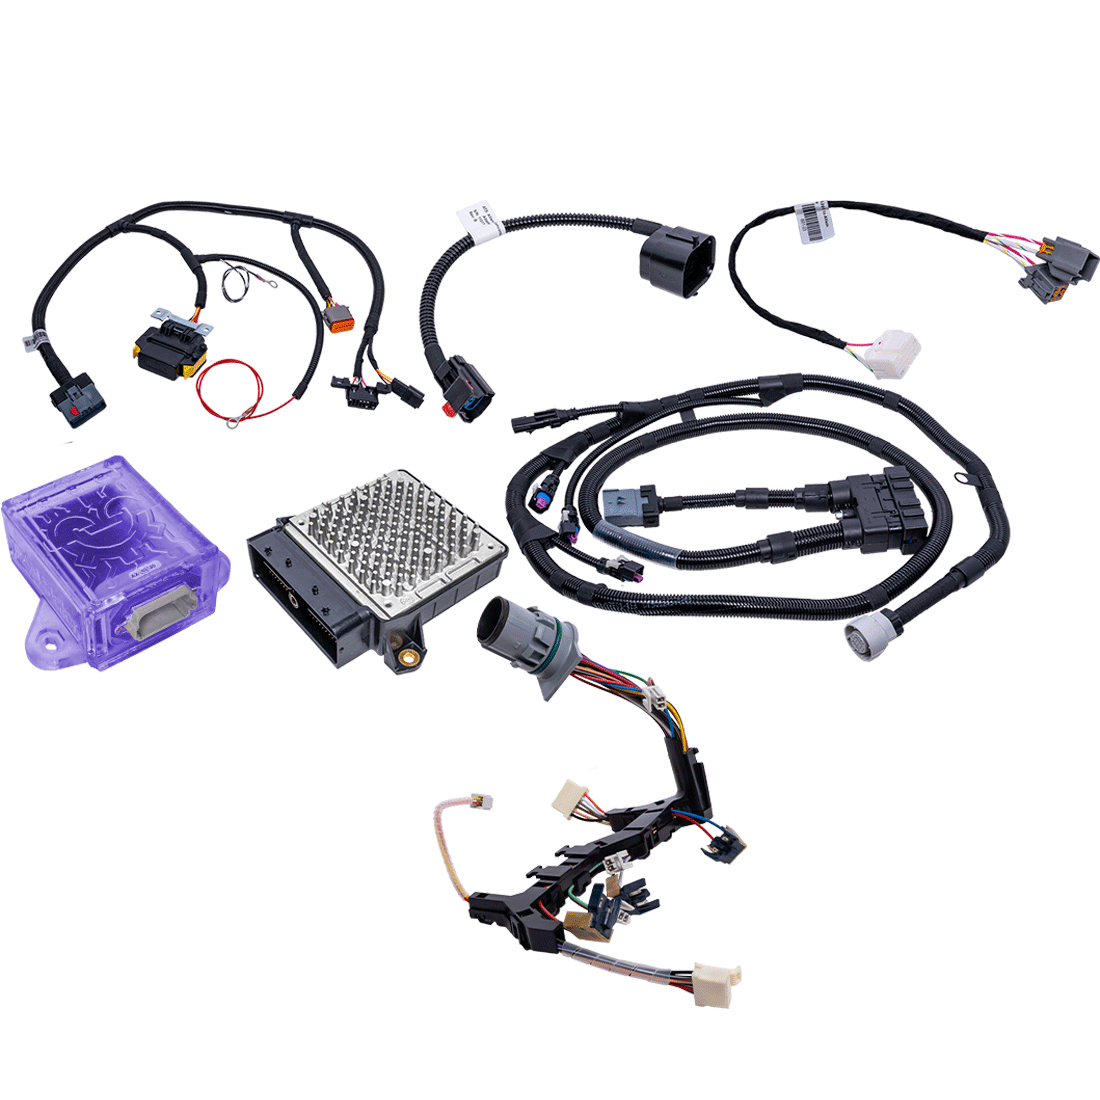 ATS 3190522416 Electronics Upgrade Kit Allison Conversion 68RFE 2015-Current 2006-2010 6 Speed Allison Used in Conversion